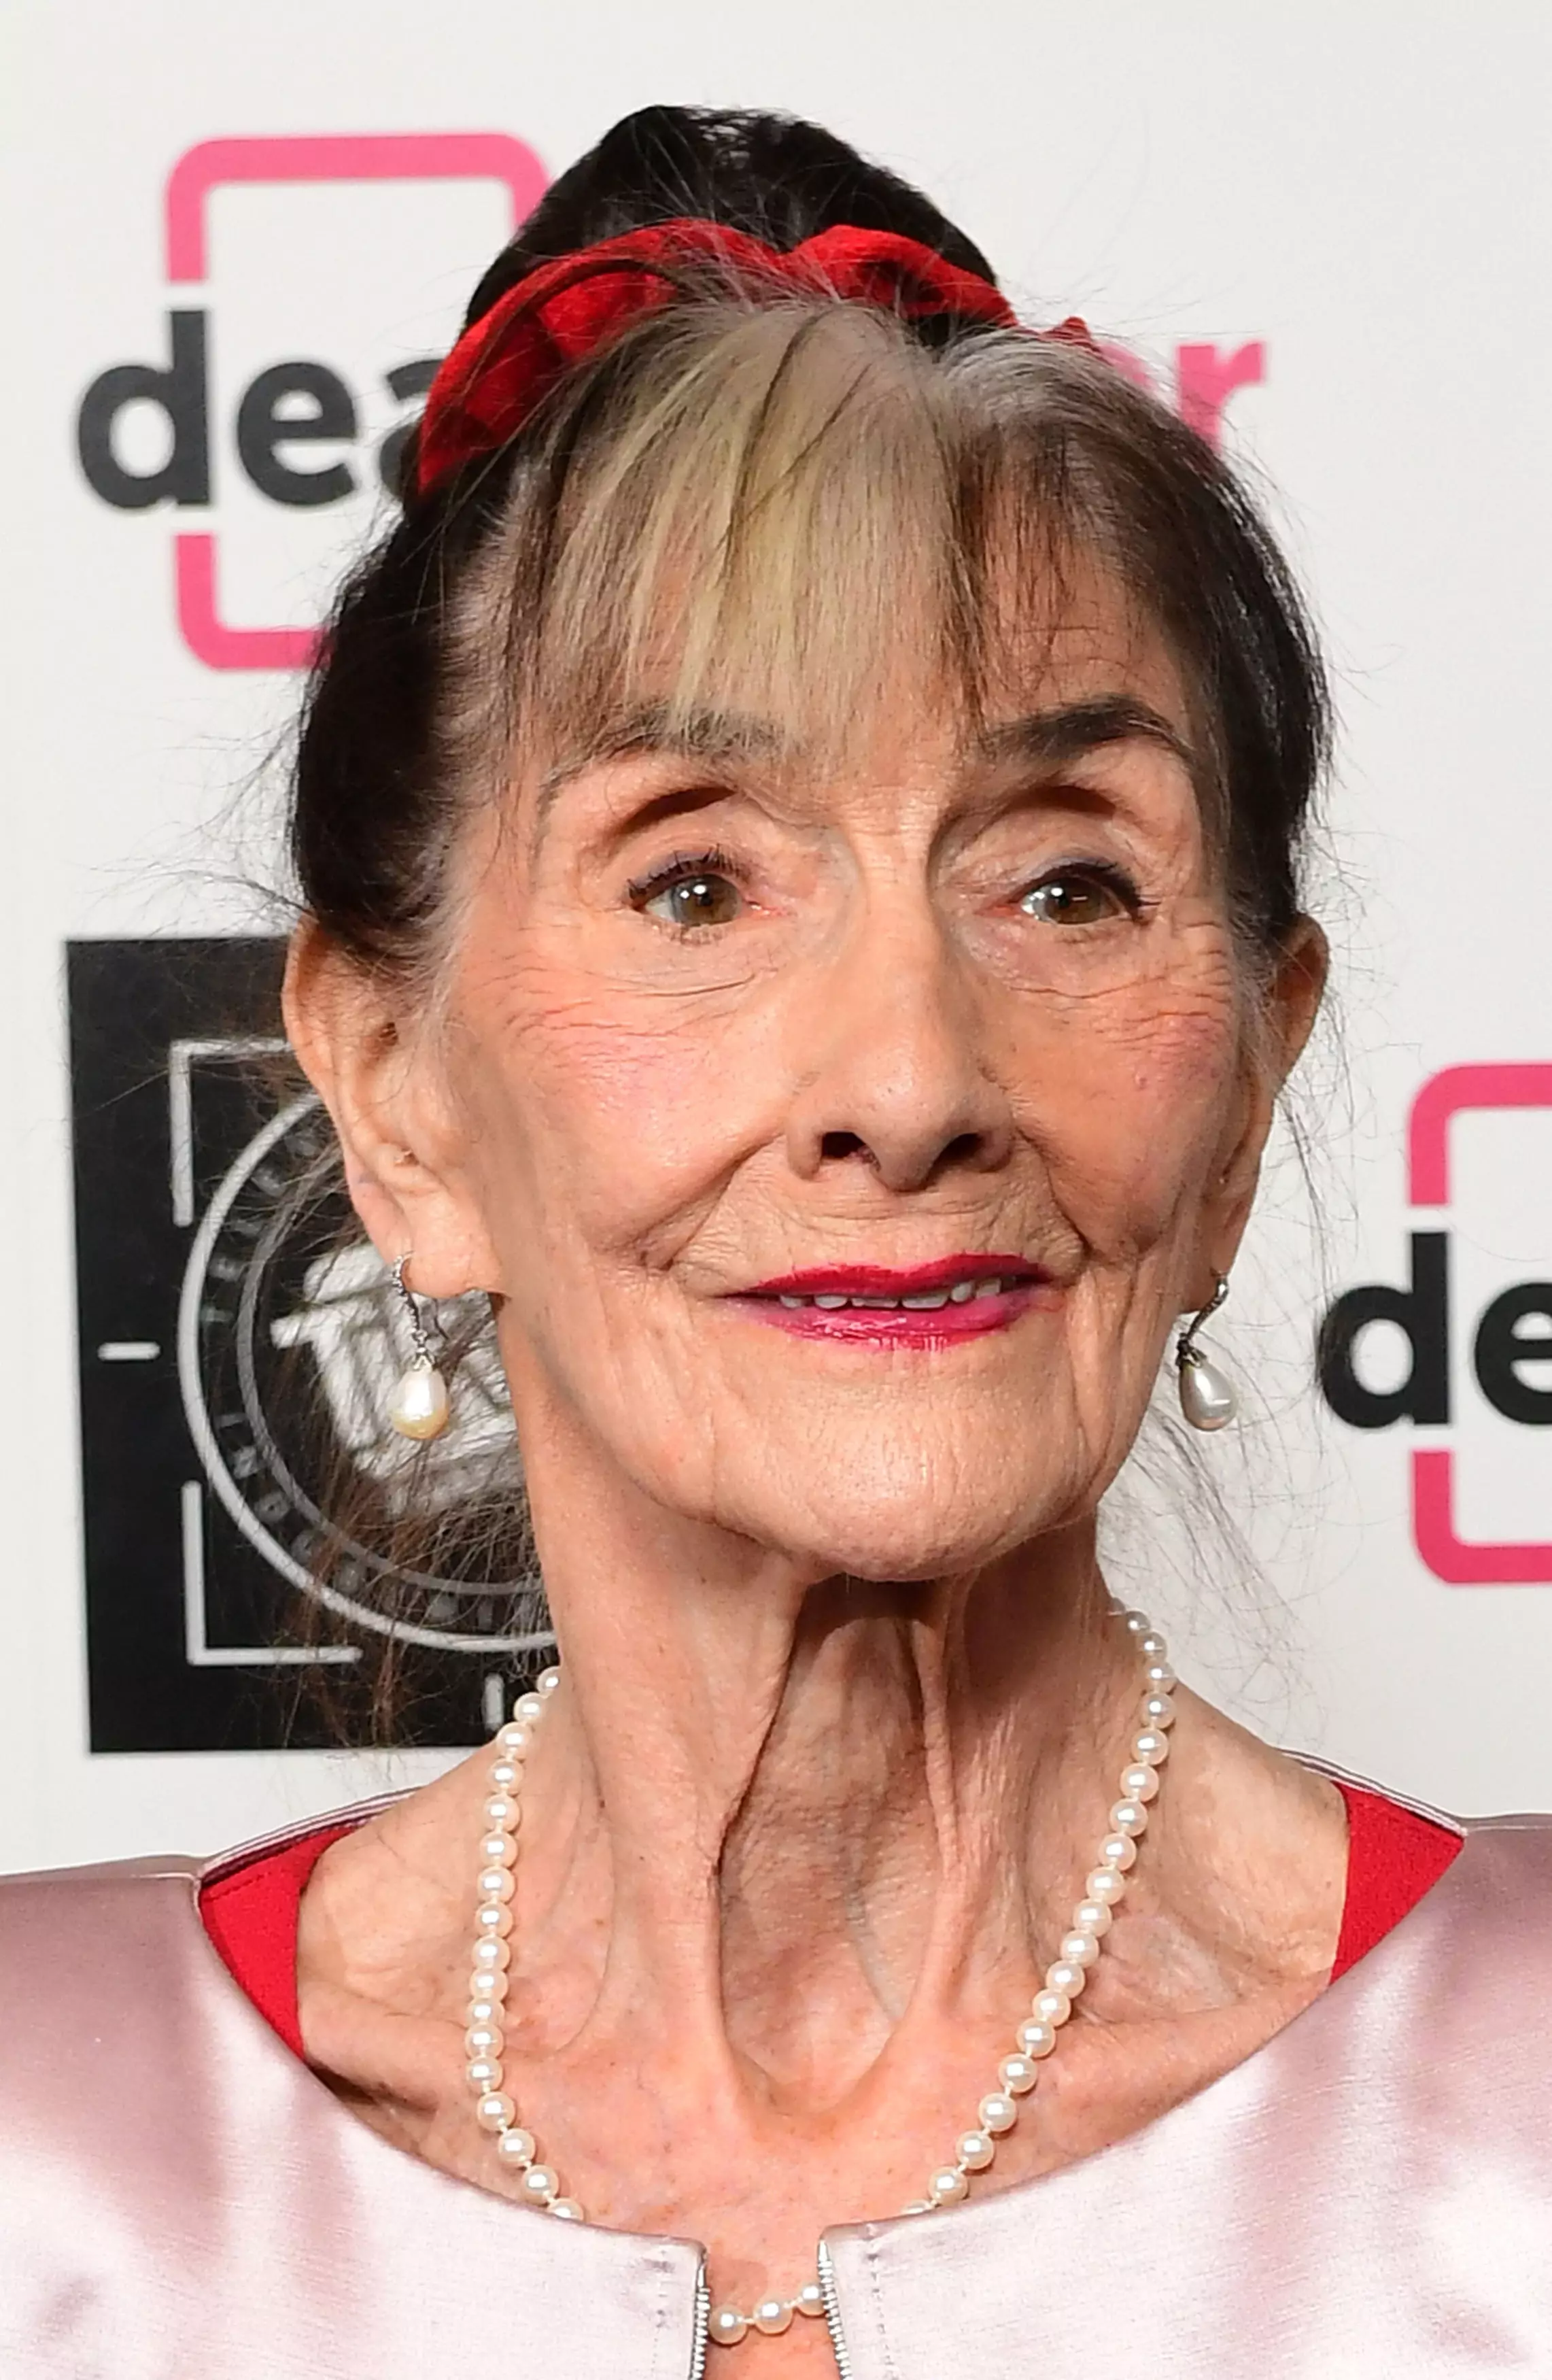 June Brown says she got sick of sex about 20 years ago.